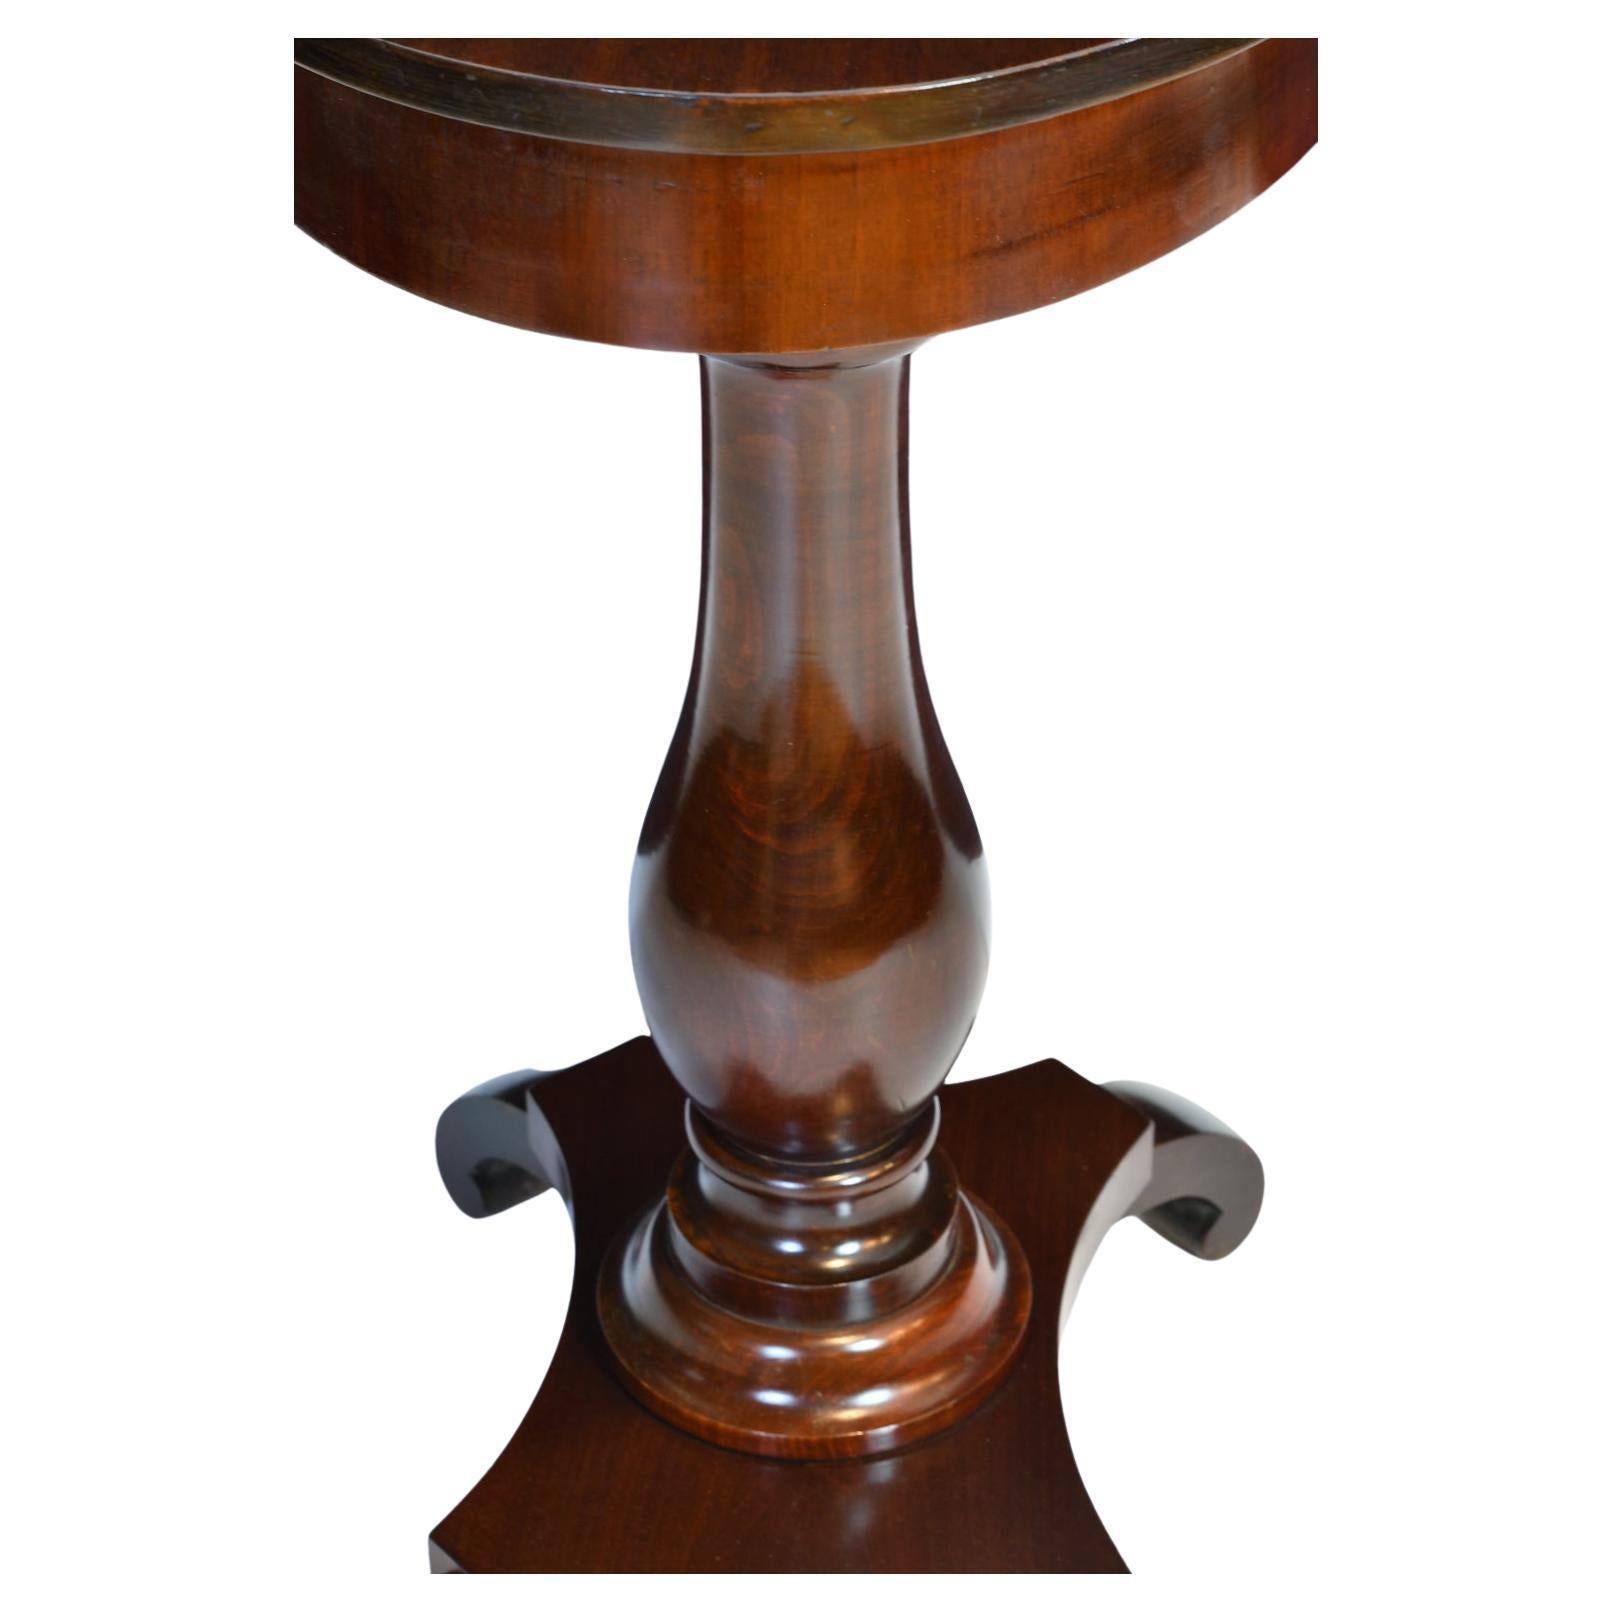 Small Antique Oval Pedestal Table or Work Table in Dark-Stained Mahogany For Sale 9